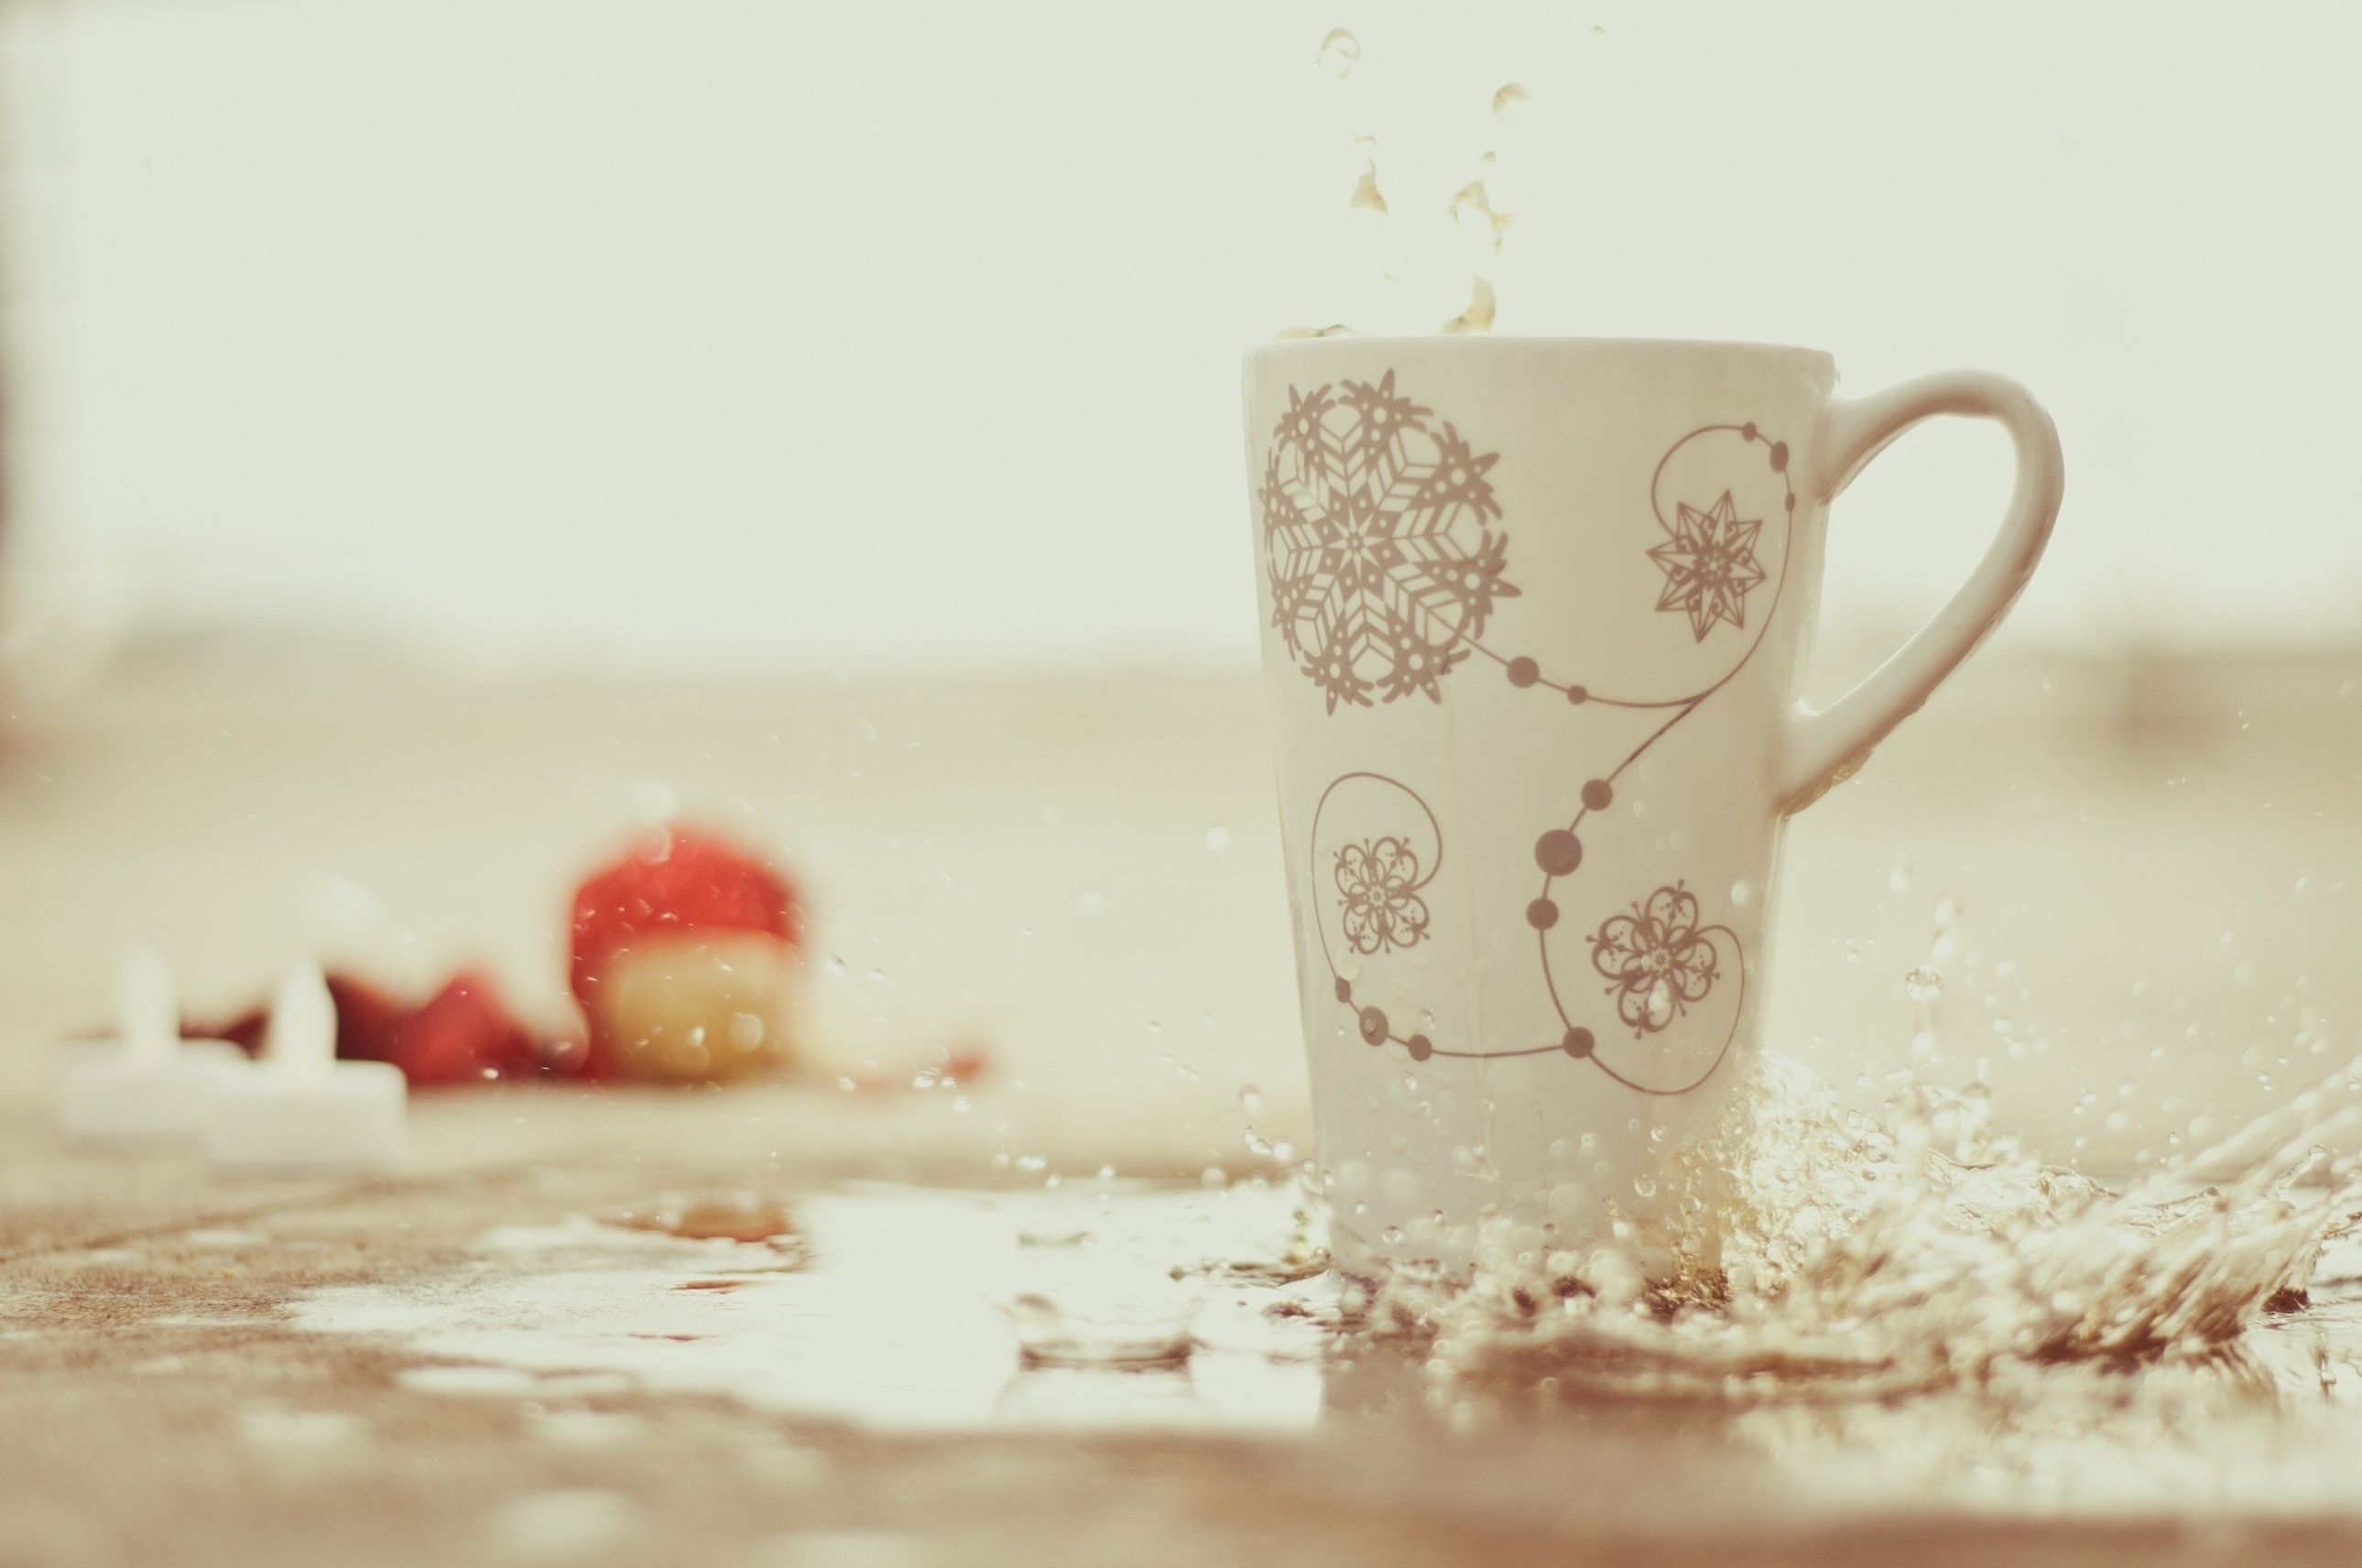 water, food, snowflakes, drops, cup, spray, blur, smooth